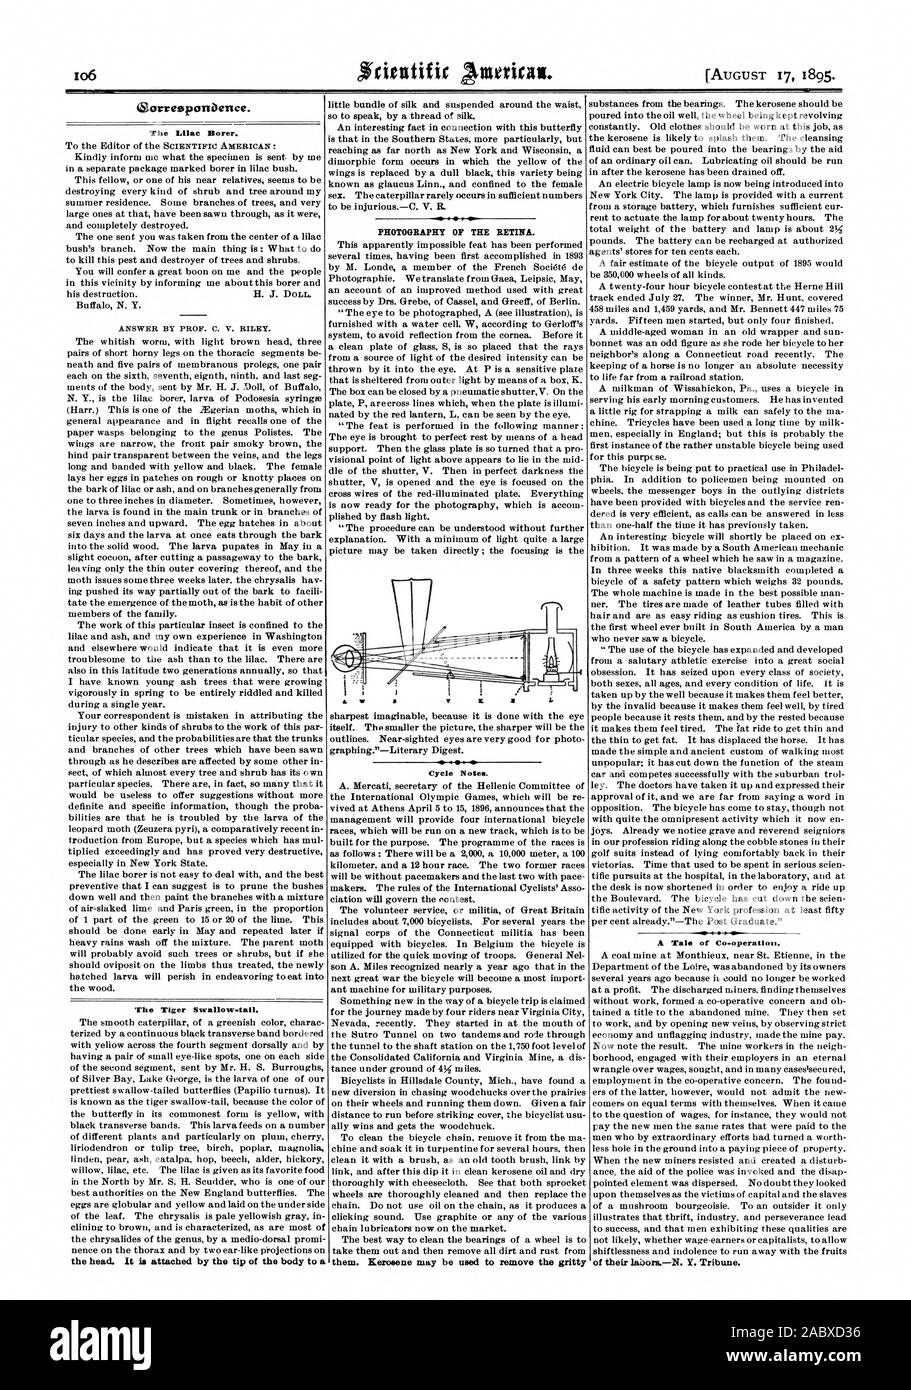 The Lilac Borer. ANSWER BY PROF. C. V. RILEY. The Tiger Swallow-tail. the head. It is attached by the tip of the body to a PHOTOGRAPHY OF THE RETINA. Cycle Notes. them. Kerosene may be used to remove the gritty A Tale of Co-operation. of their laborsN. Y. Tribune., scientific american, 1895-08-17 Stock Photo